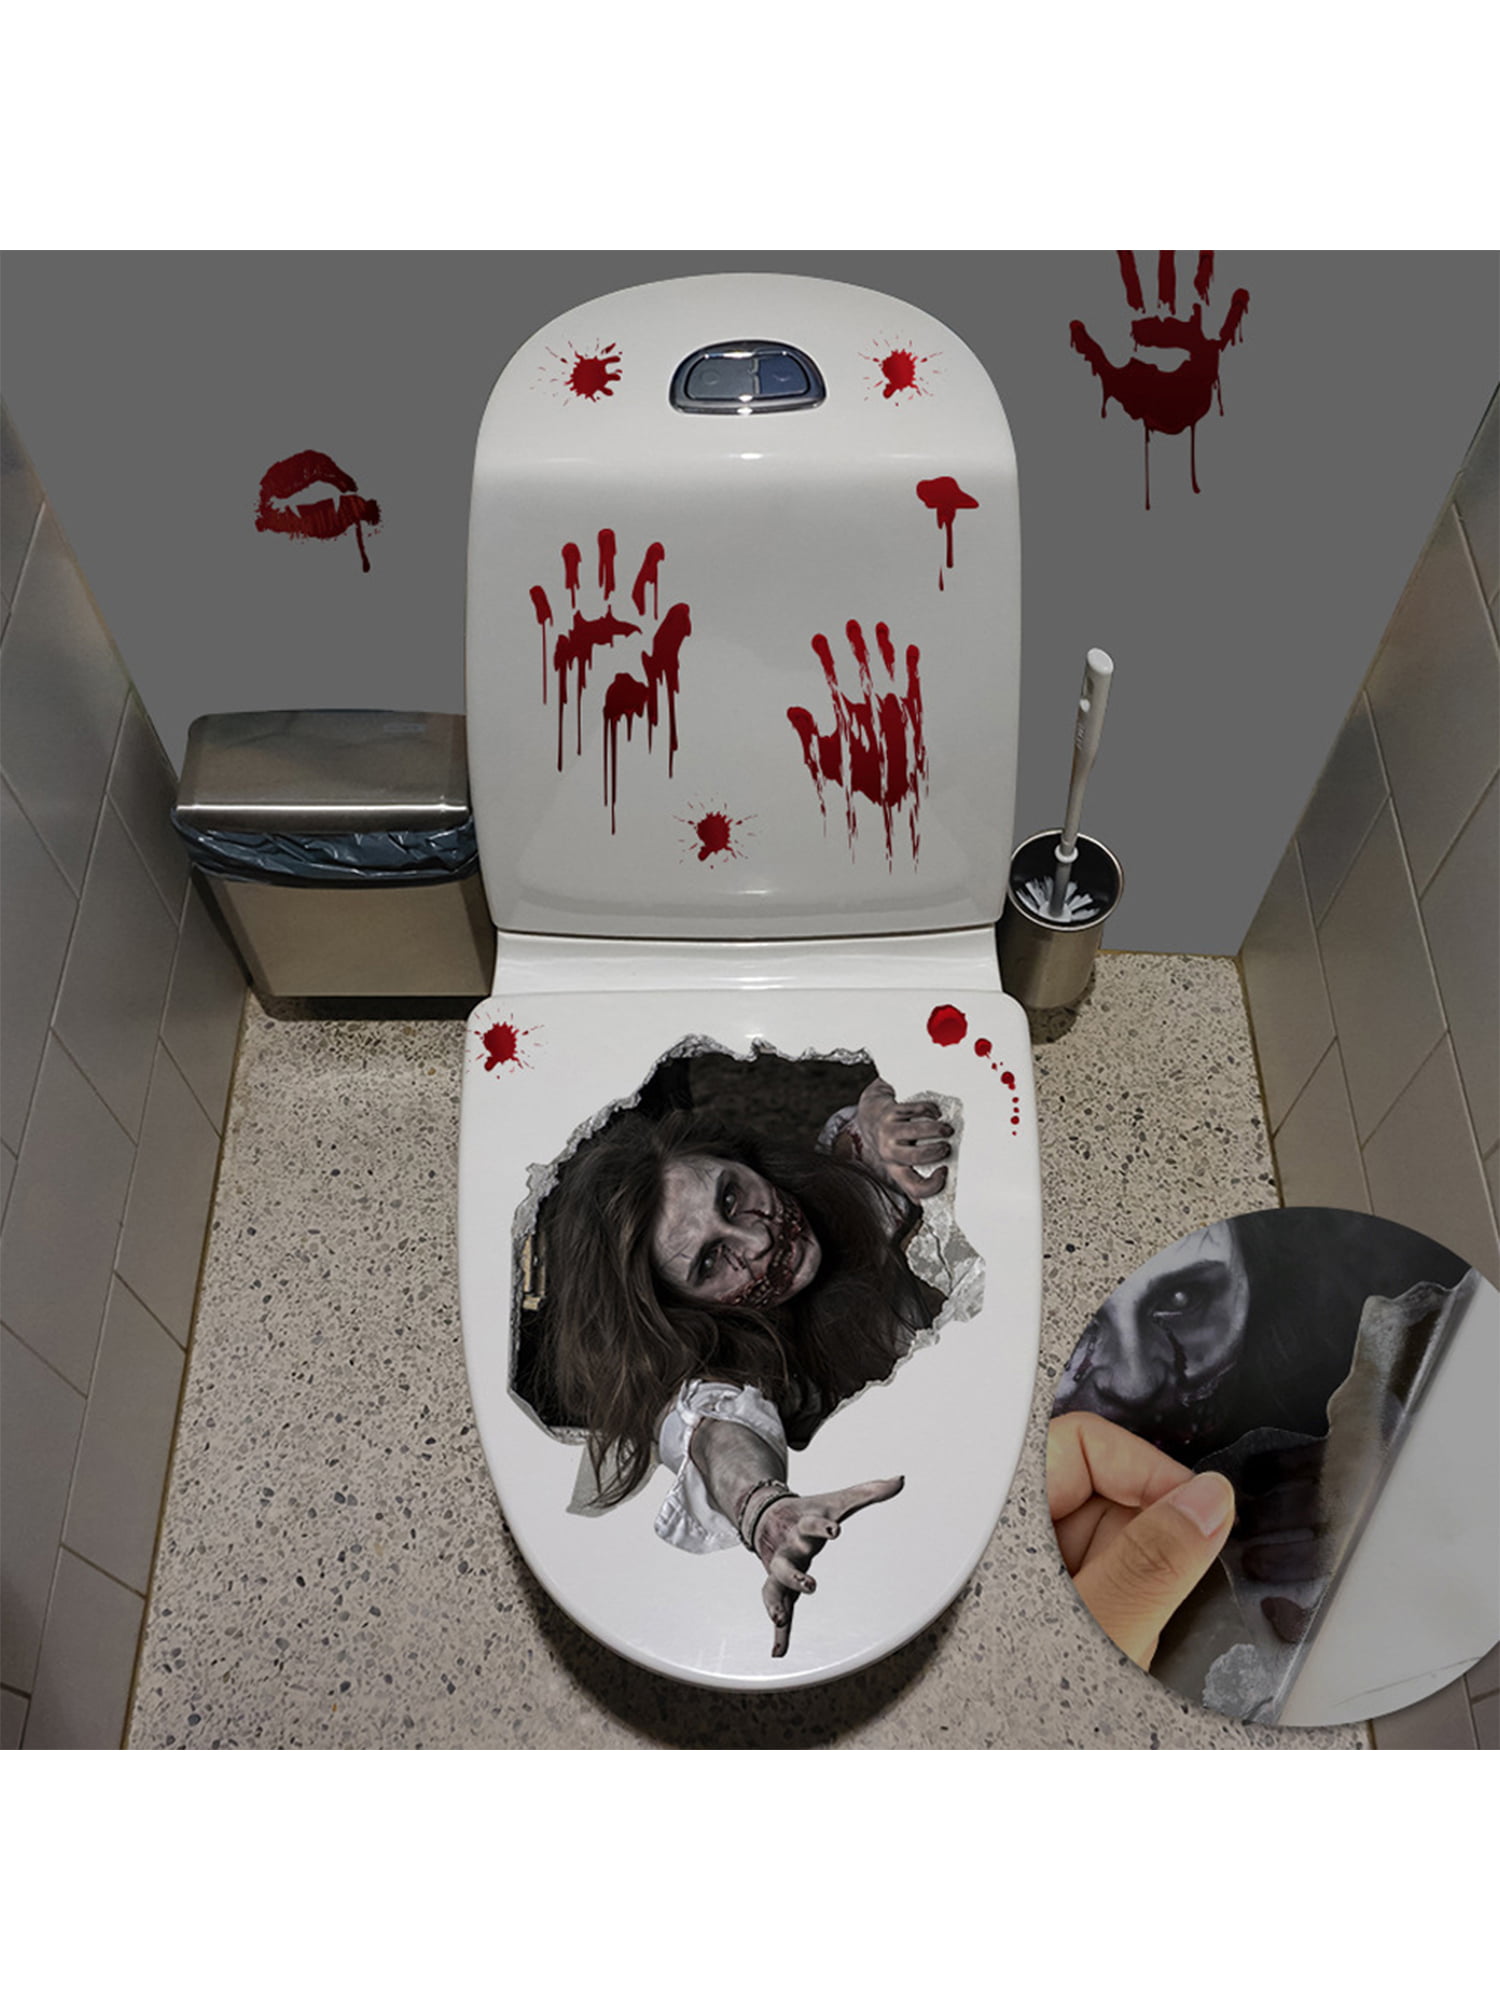 Halloween Decoration Creepy Prank Toilet Seat Lid Cover Cling Decal Alligator